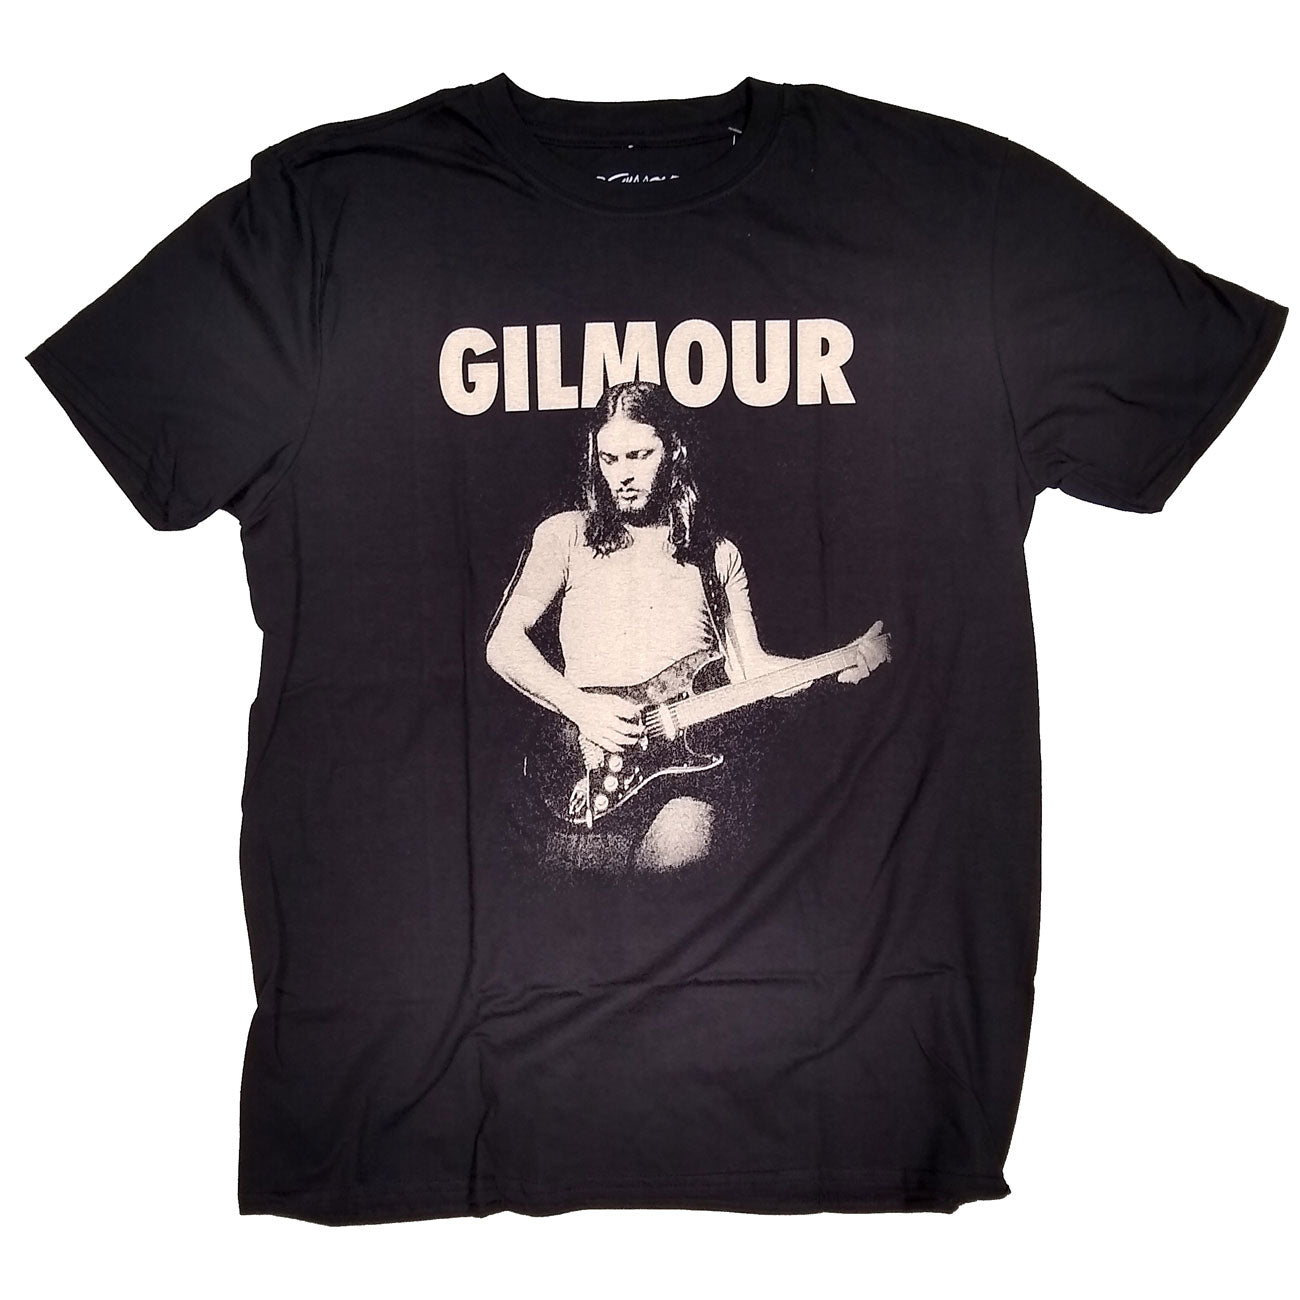 David Gilmour T Shirt - On Stage 100% Official Pink Floyd